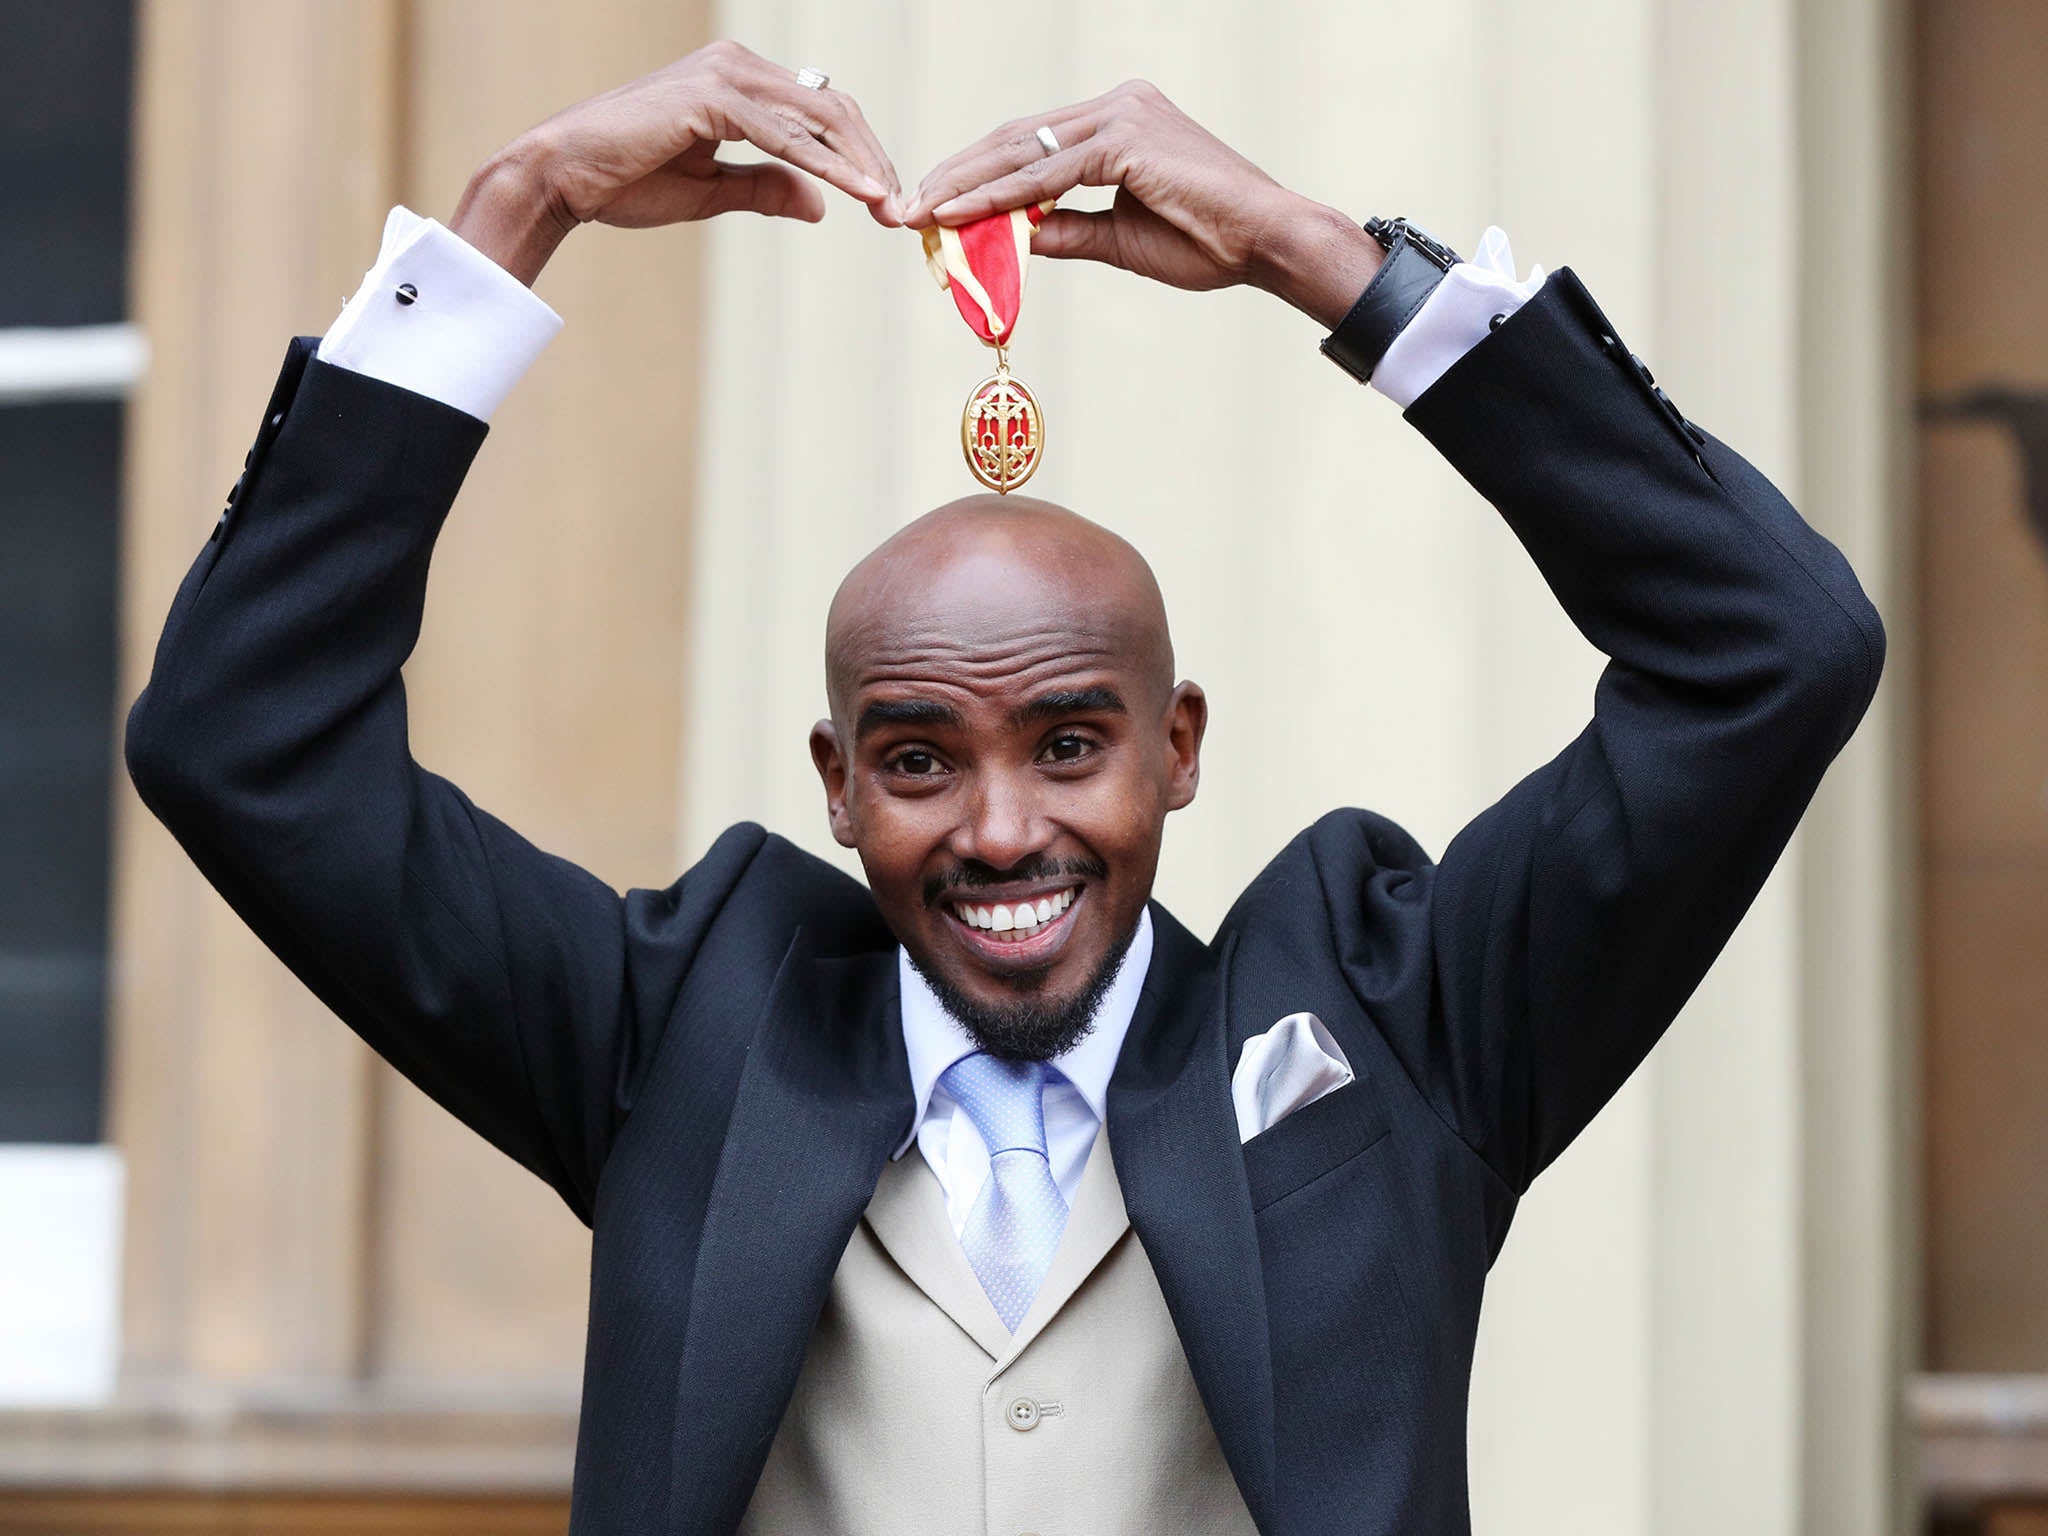 Four-time Olympic champion Sir Mo Farah after he was awarded a Knighthood by Queen Elizabeth II